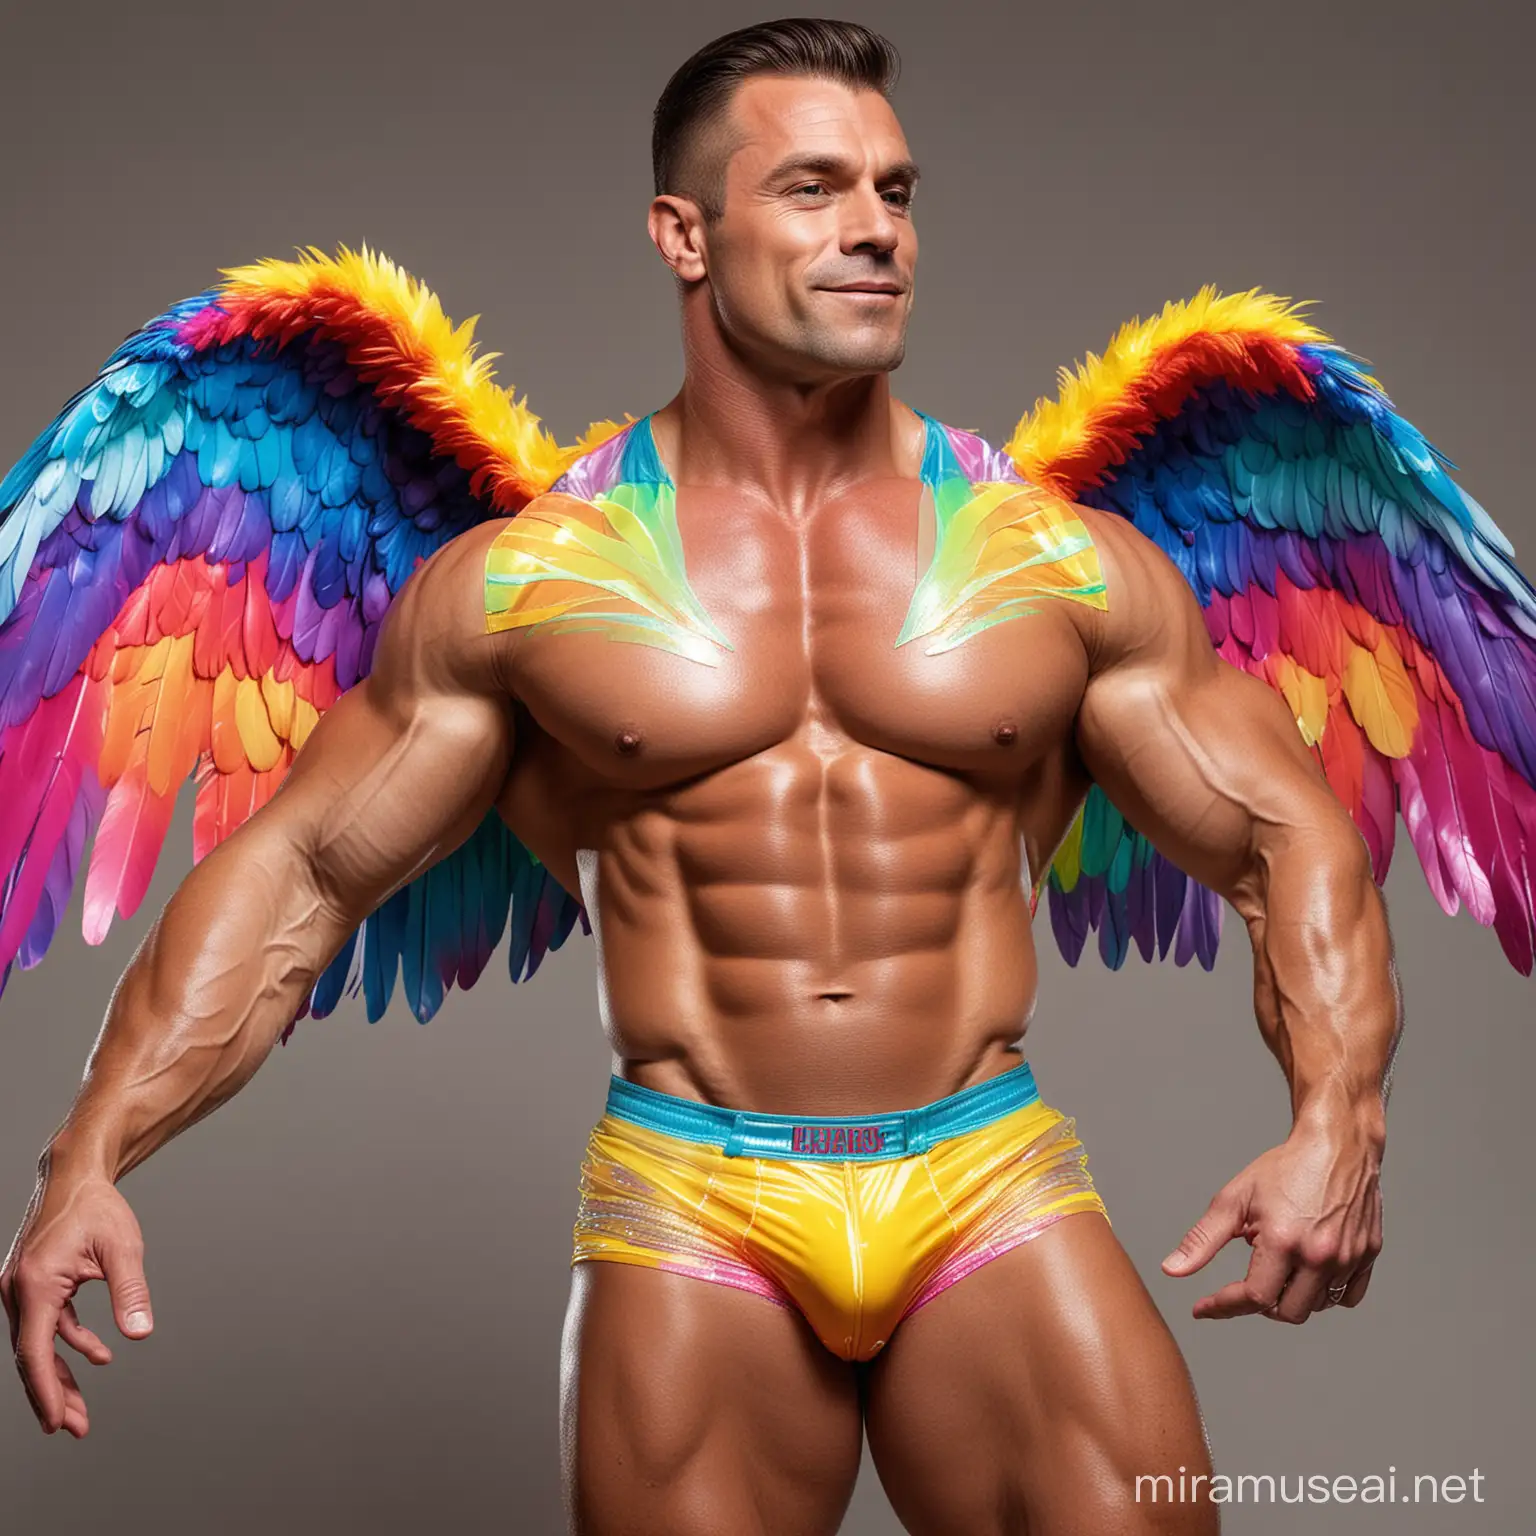 Topless 40s Ultra Beefy IFBB Bodybuilder Man wearing Multi-Highlighter Bright Rainbow Coloured See Through Eagle Wings Jacket short shorts and Flexing Big Strong Arm